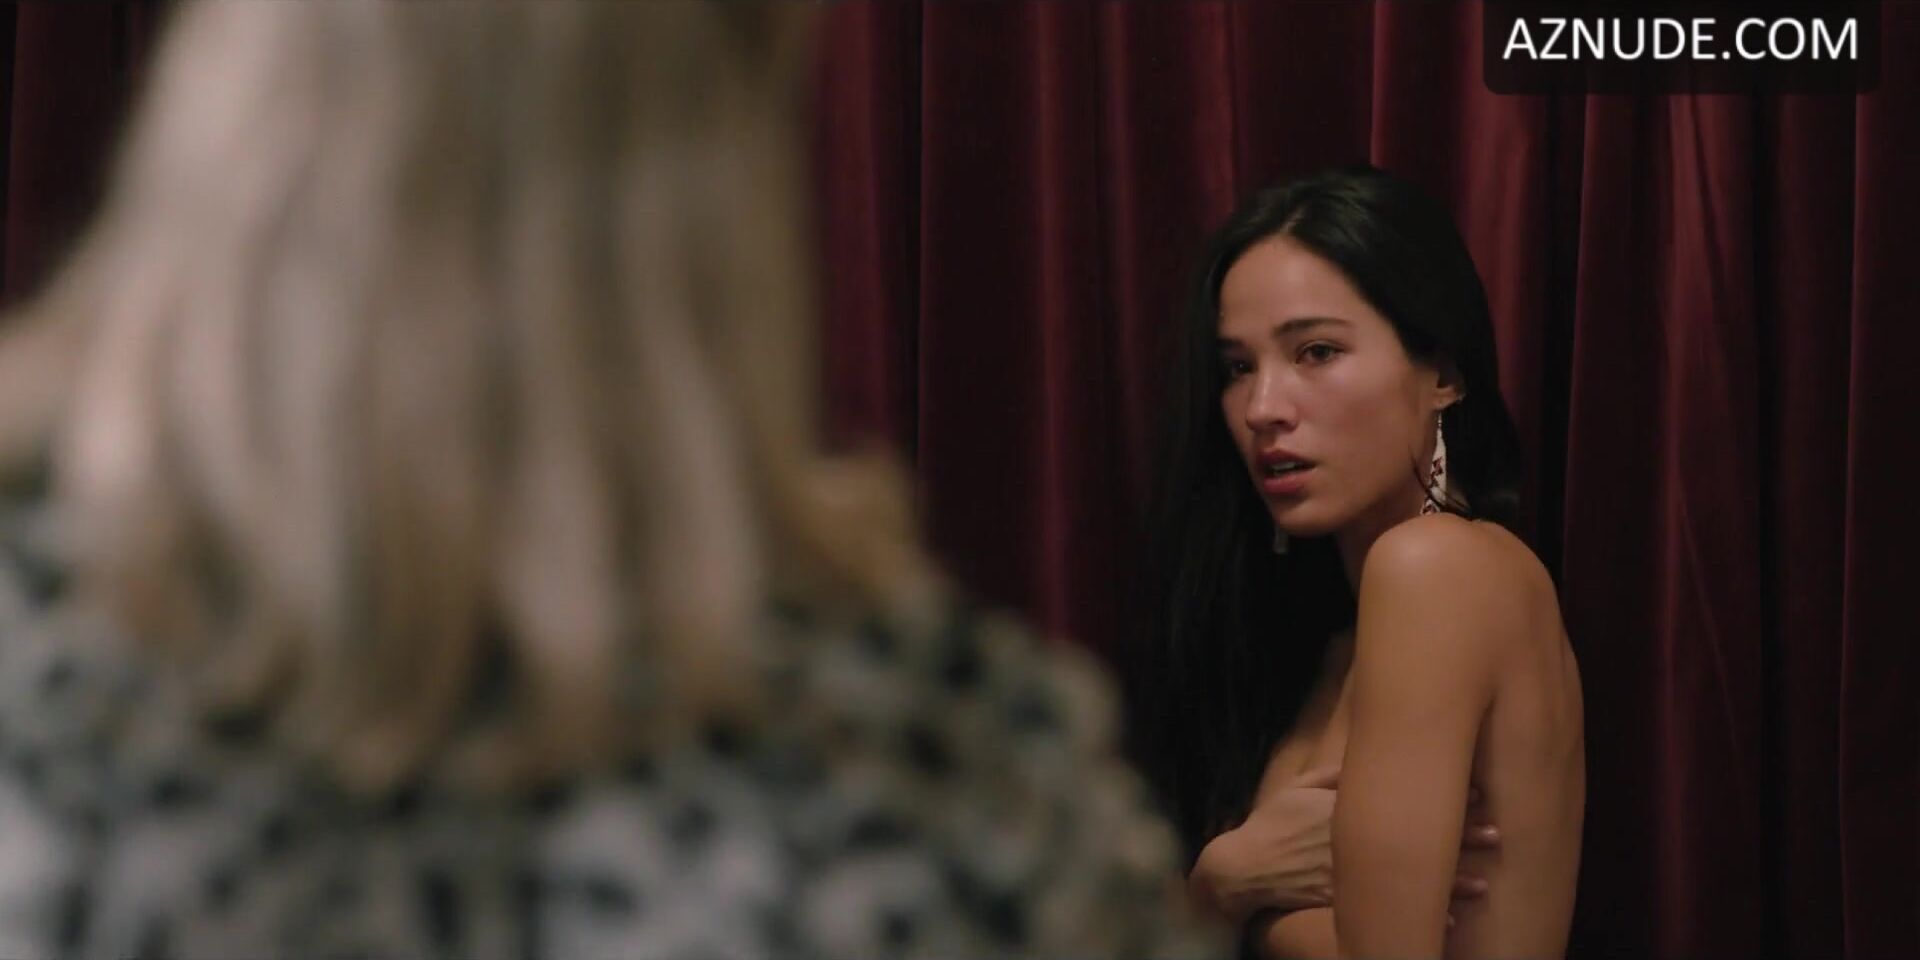 darcy pruden add kelsey chow nude scene photo